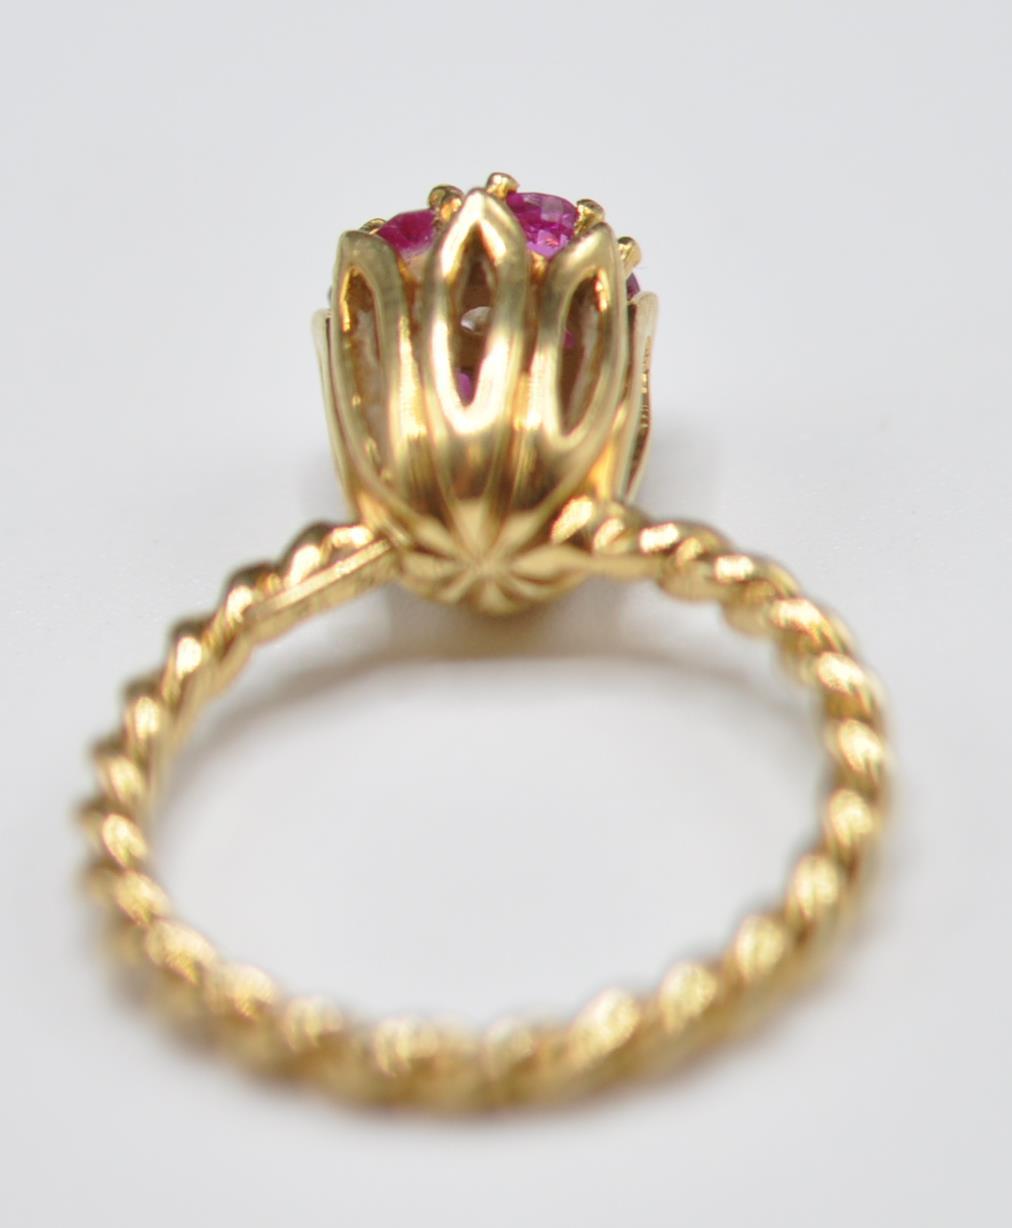 STAMPED 14CT GOLD RING WITH DIAMONDS AND RUBIES - Image 5 of 6